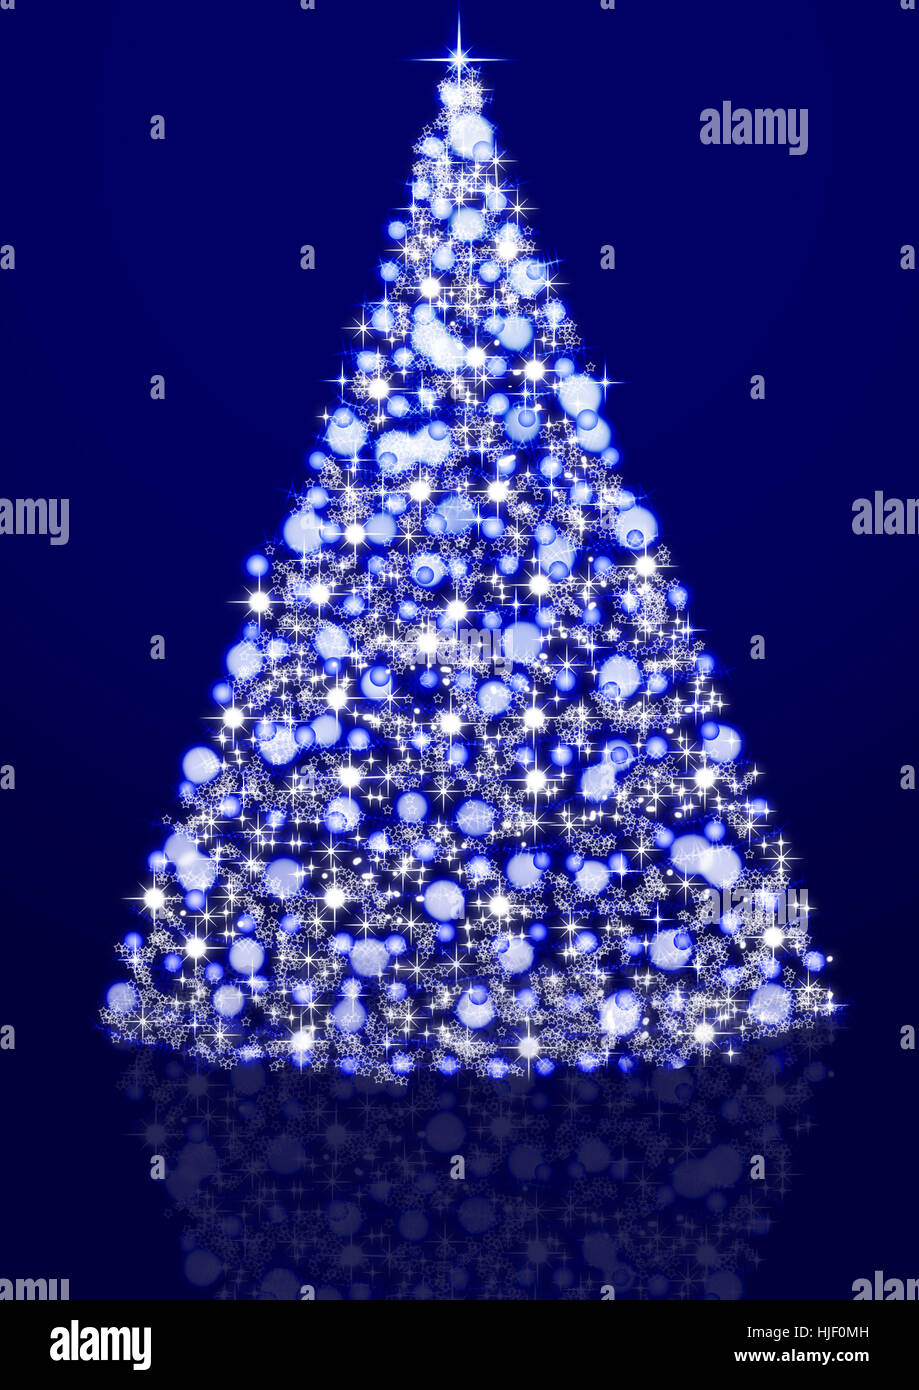 blue, greeting, art, holiday, colour, tree, trees, space, winter, graphic, Stock Photo